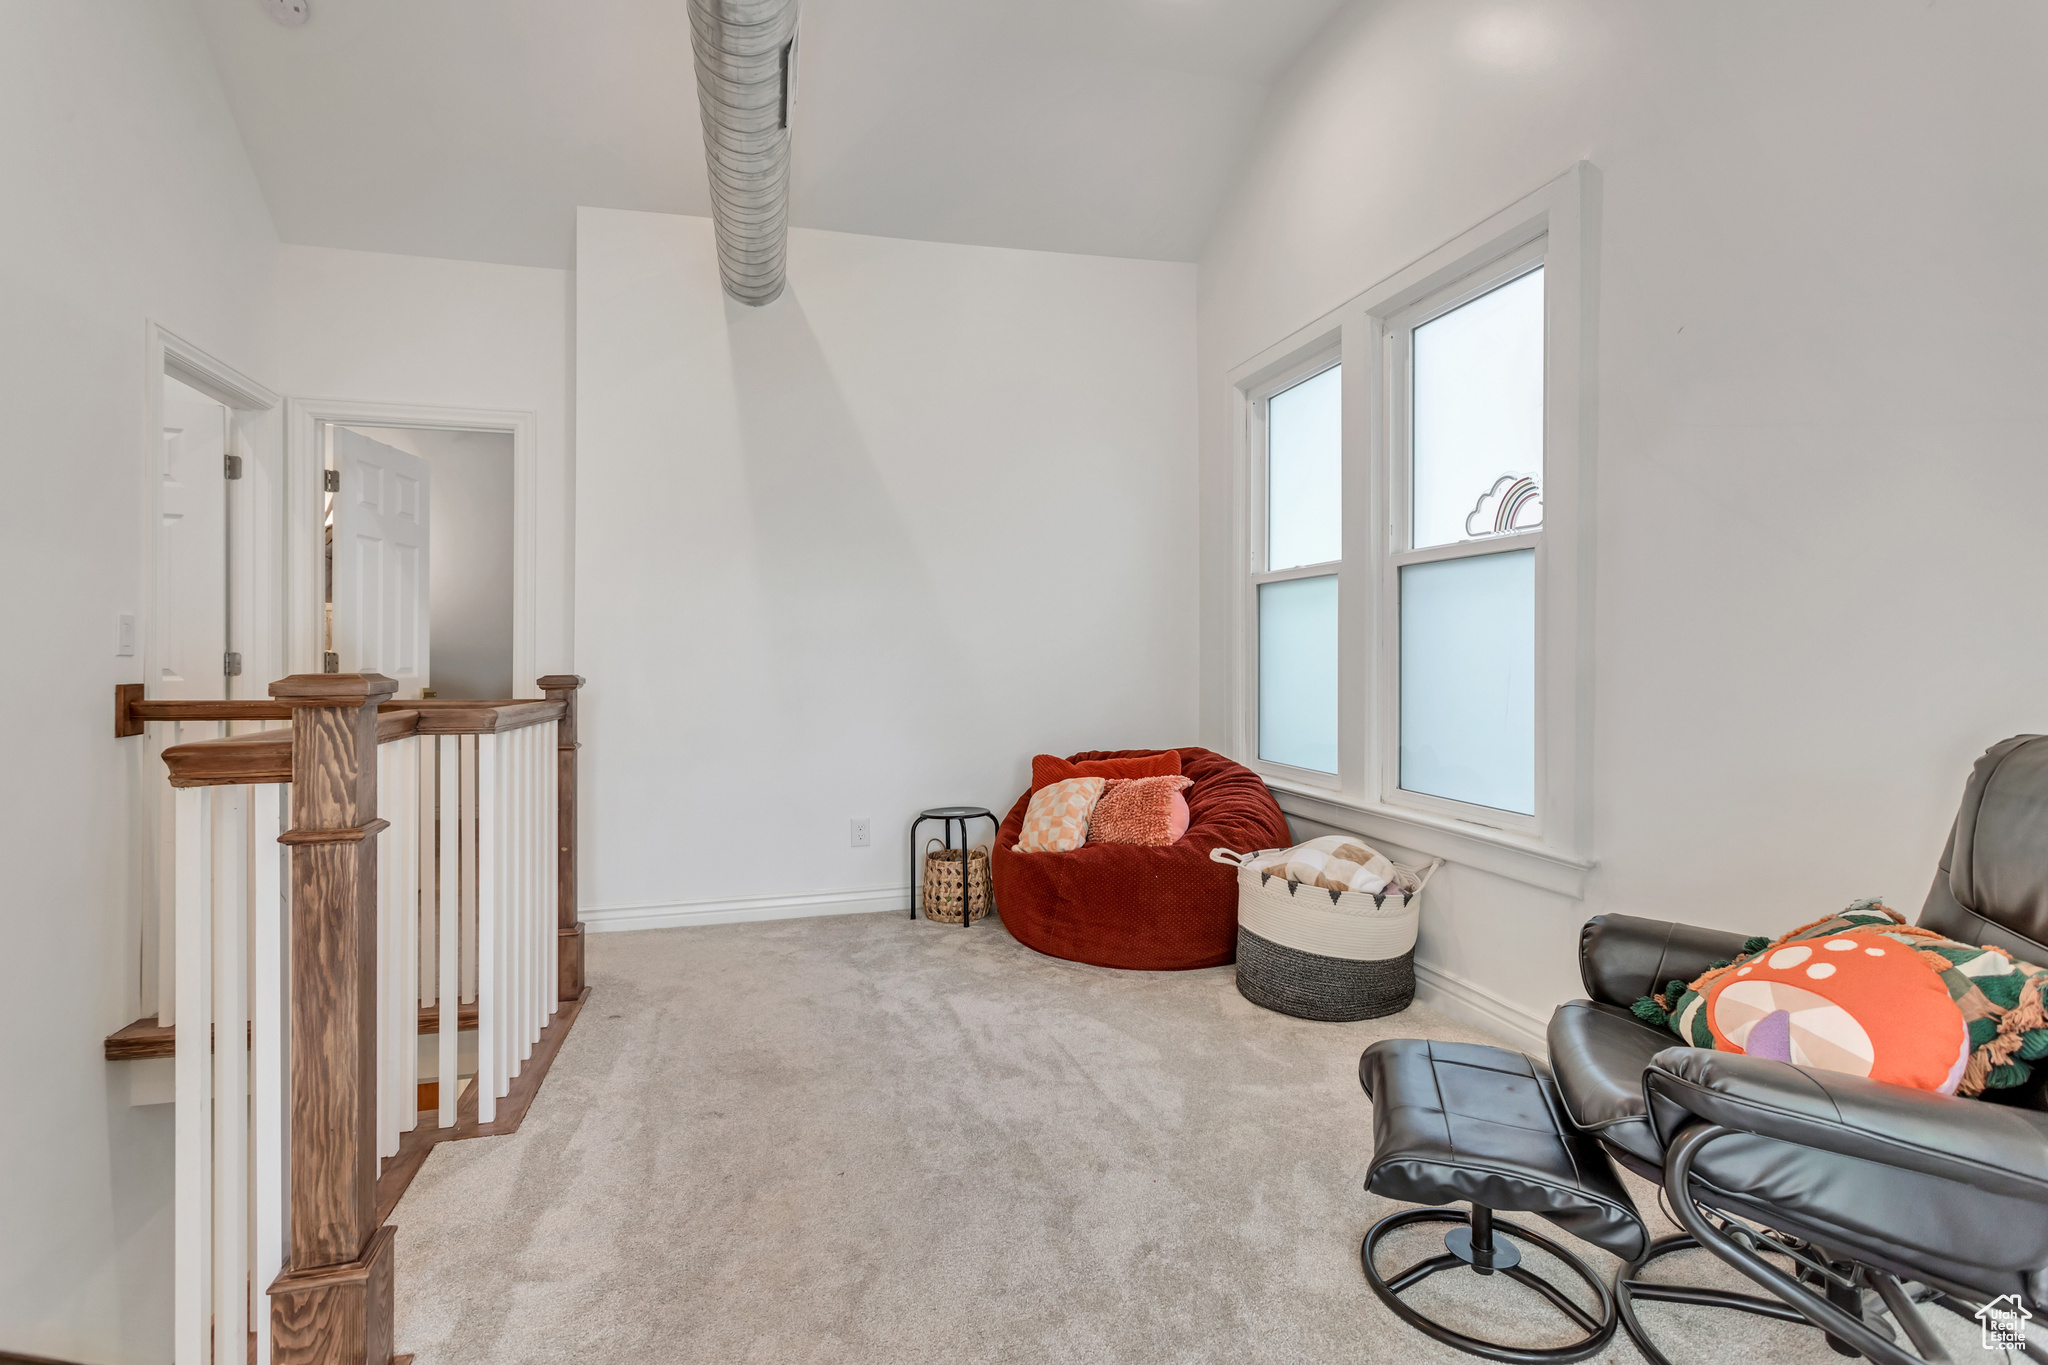 The second floor loft features soaring vaulted ceilings, a beautiful craftsman railing and plenty of flex room to suit your needs